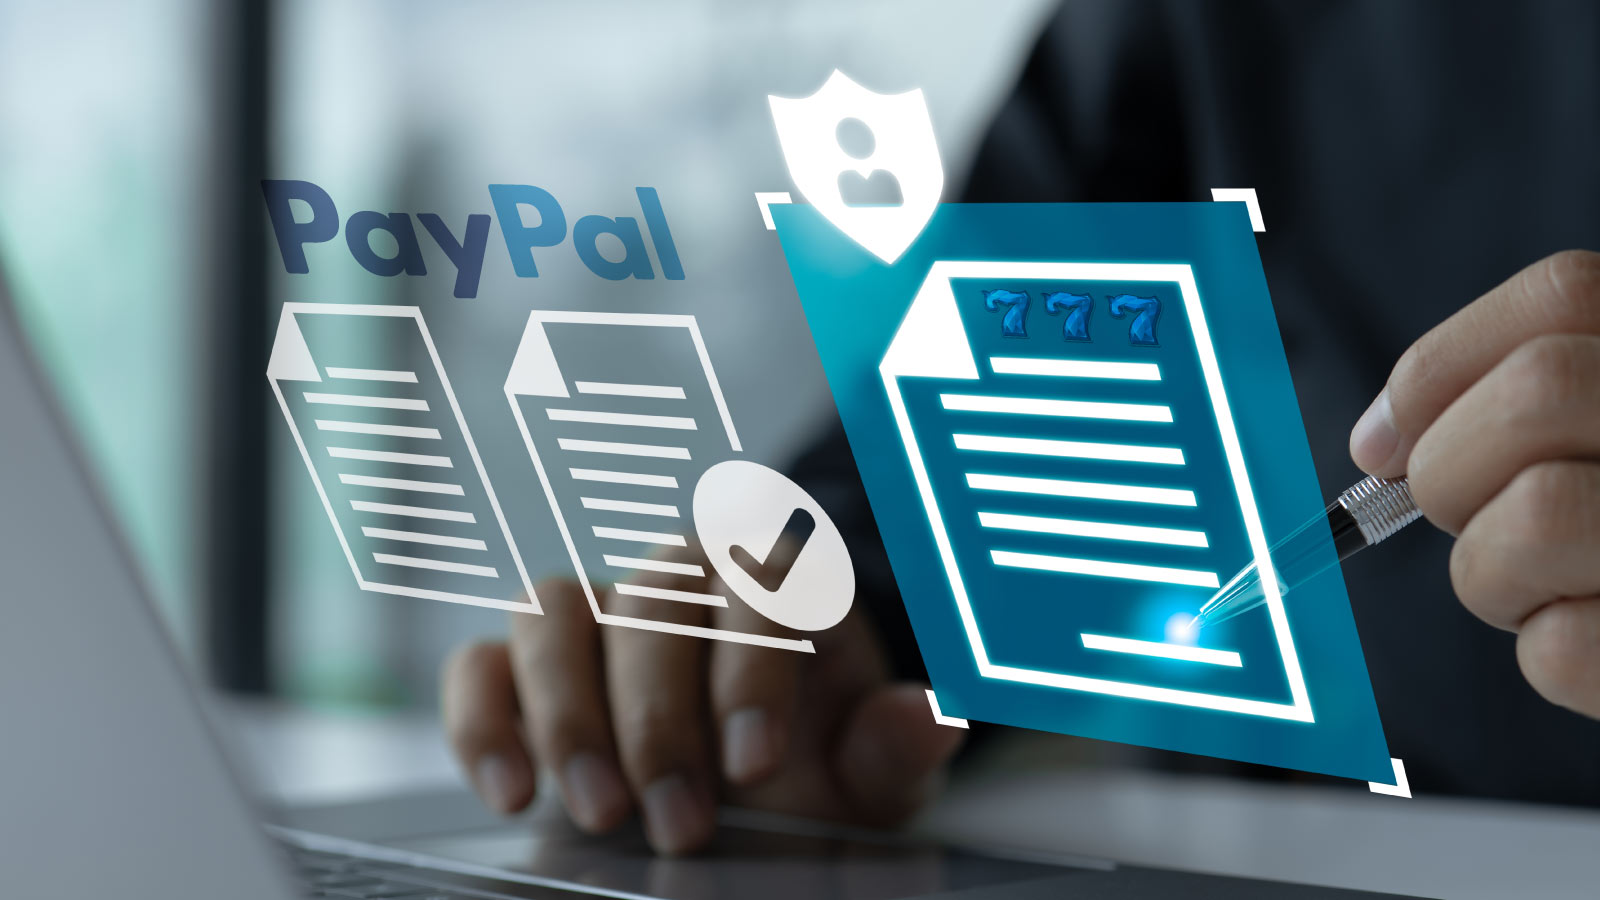 PayPal’s General Policies on Gambling Every Player Should Be Aware Of